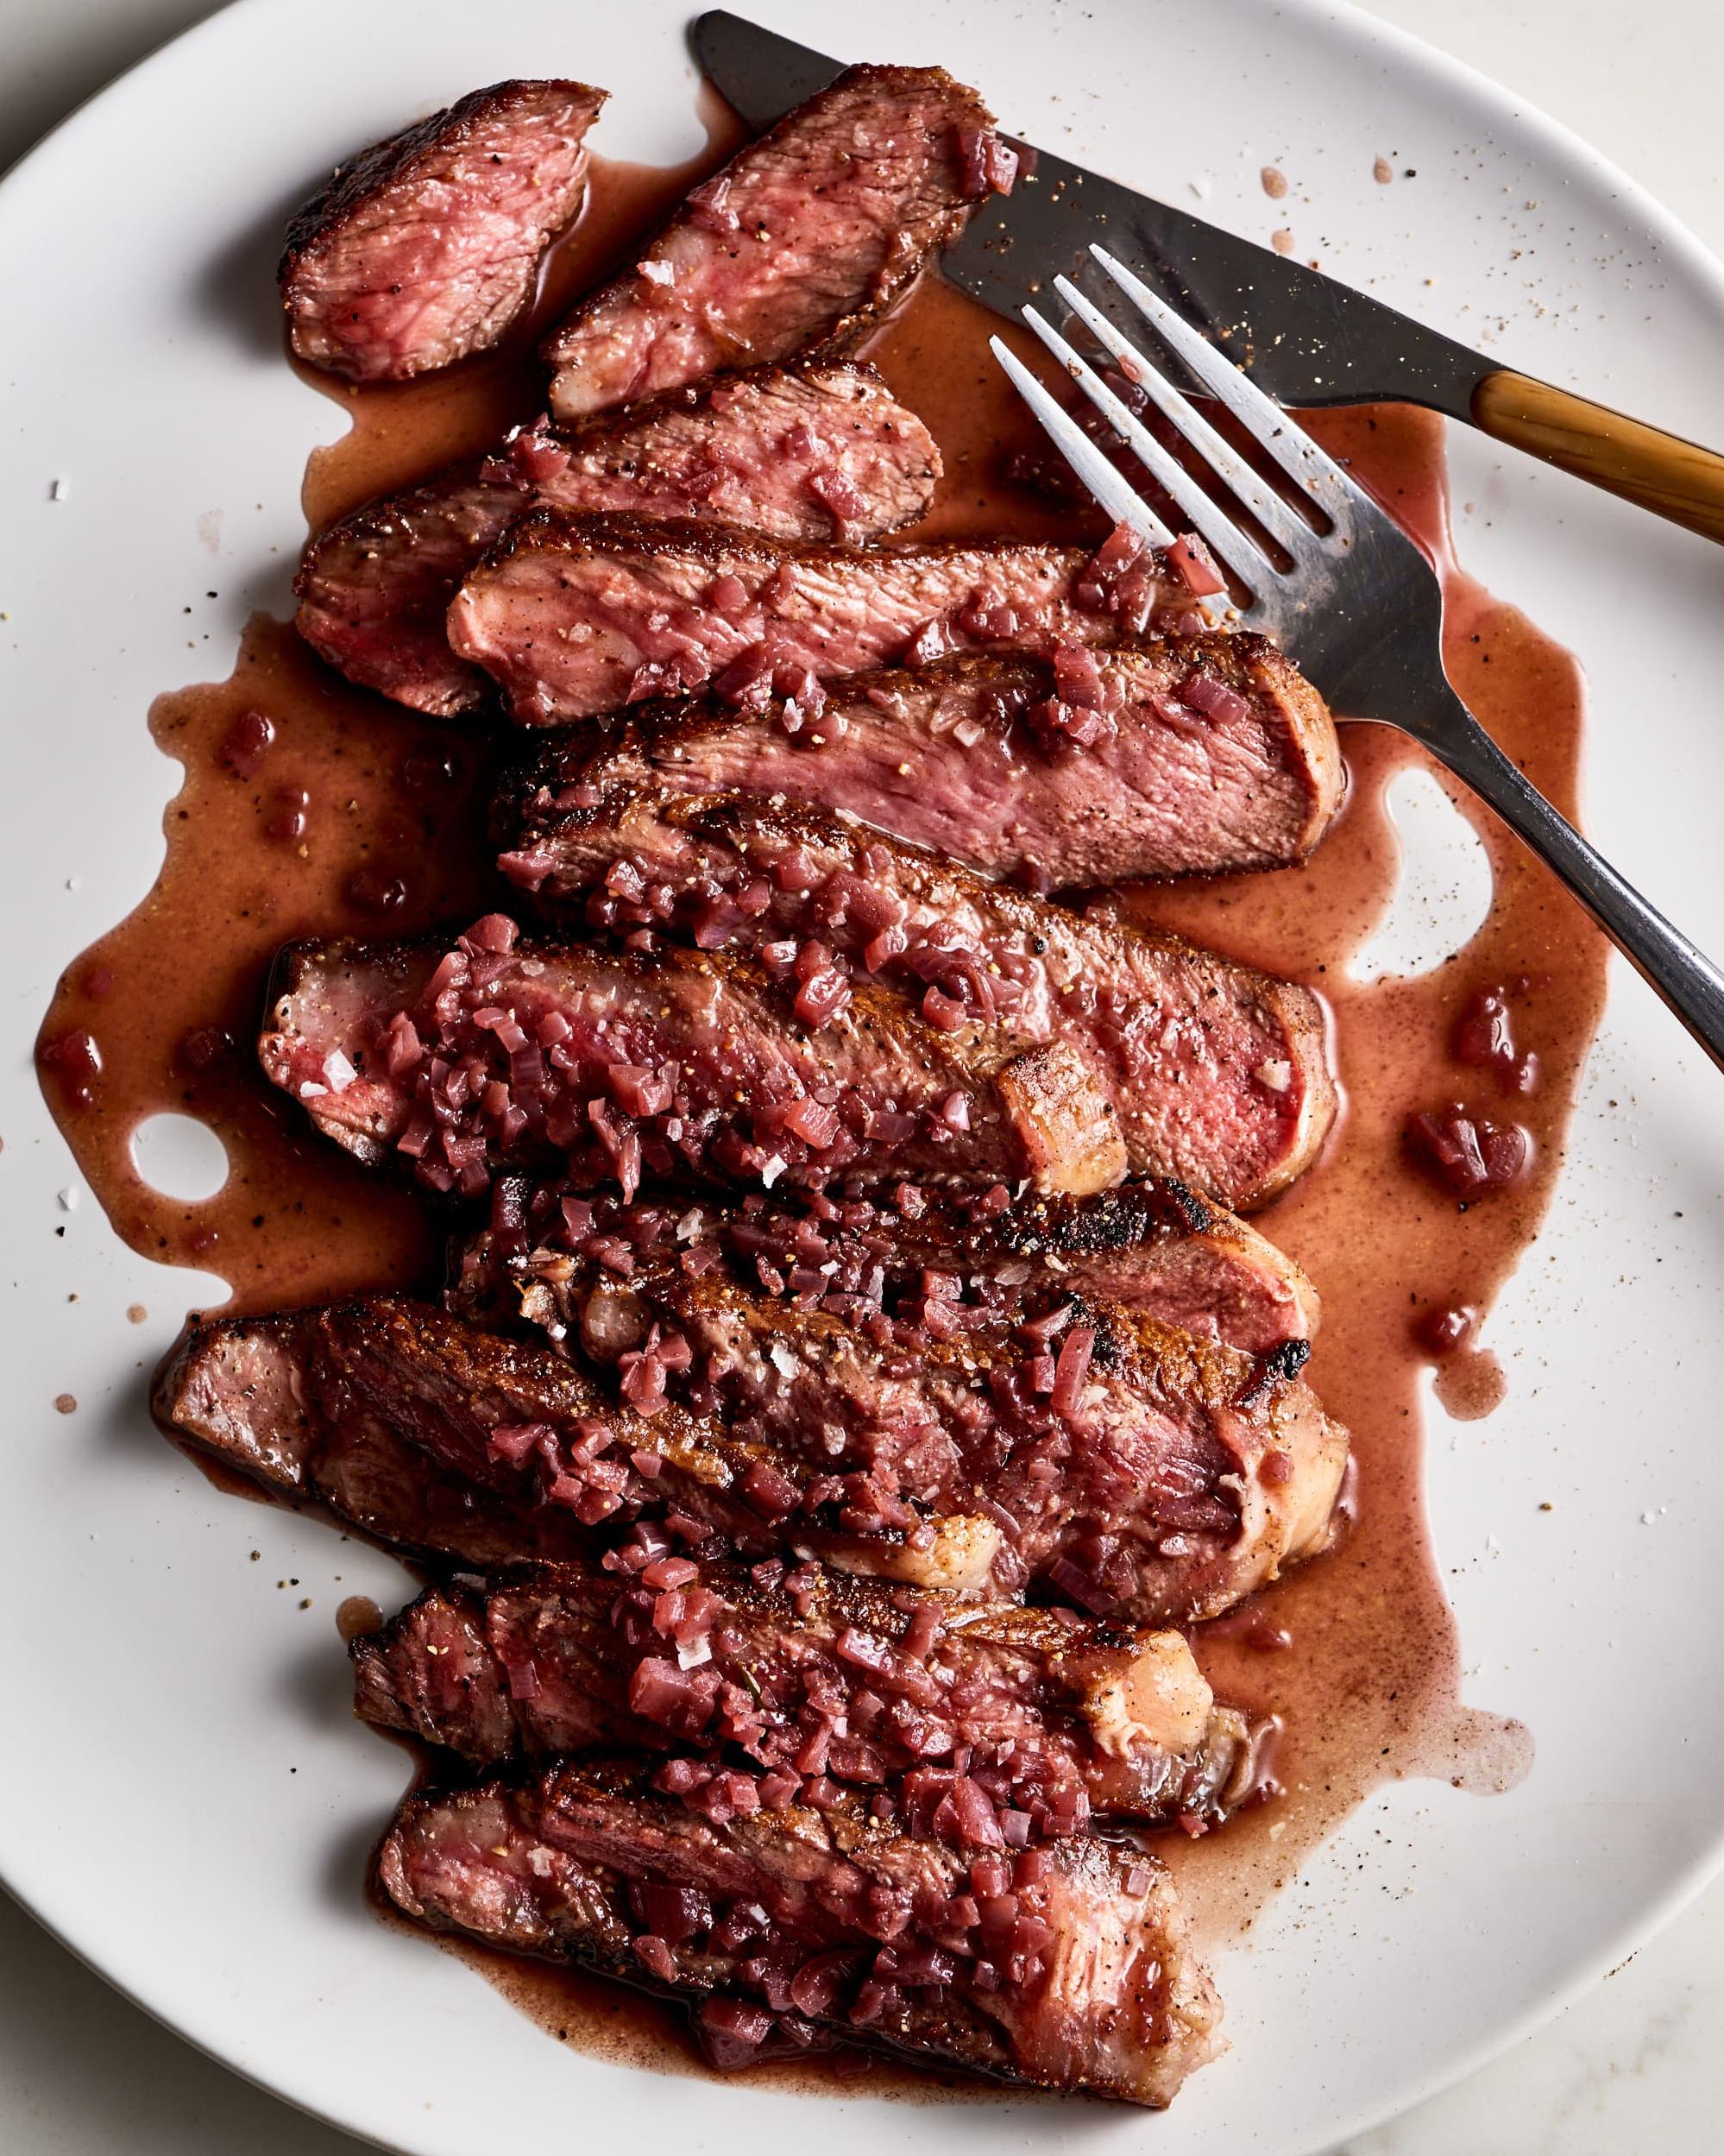 Sure, here are 11 creative caption options for the New York Steaks with Red Wine Marinade recipe: